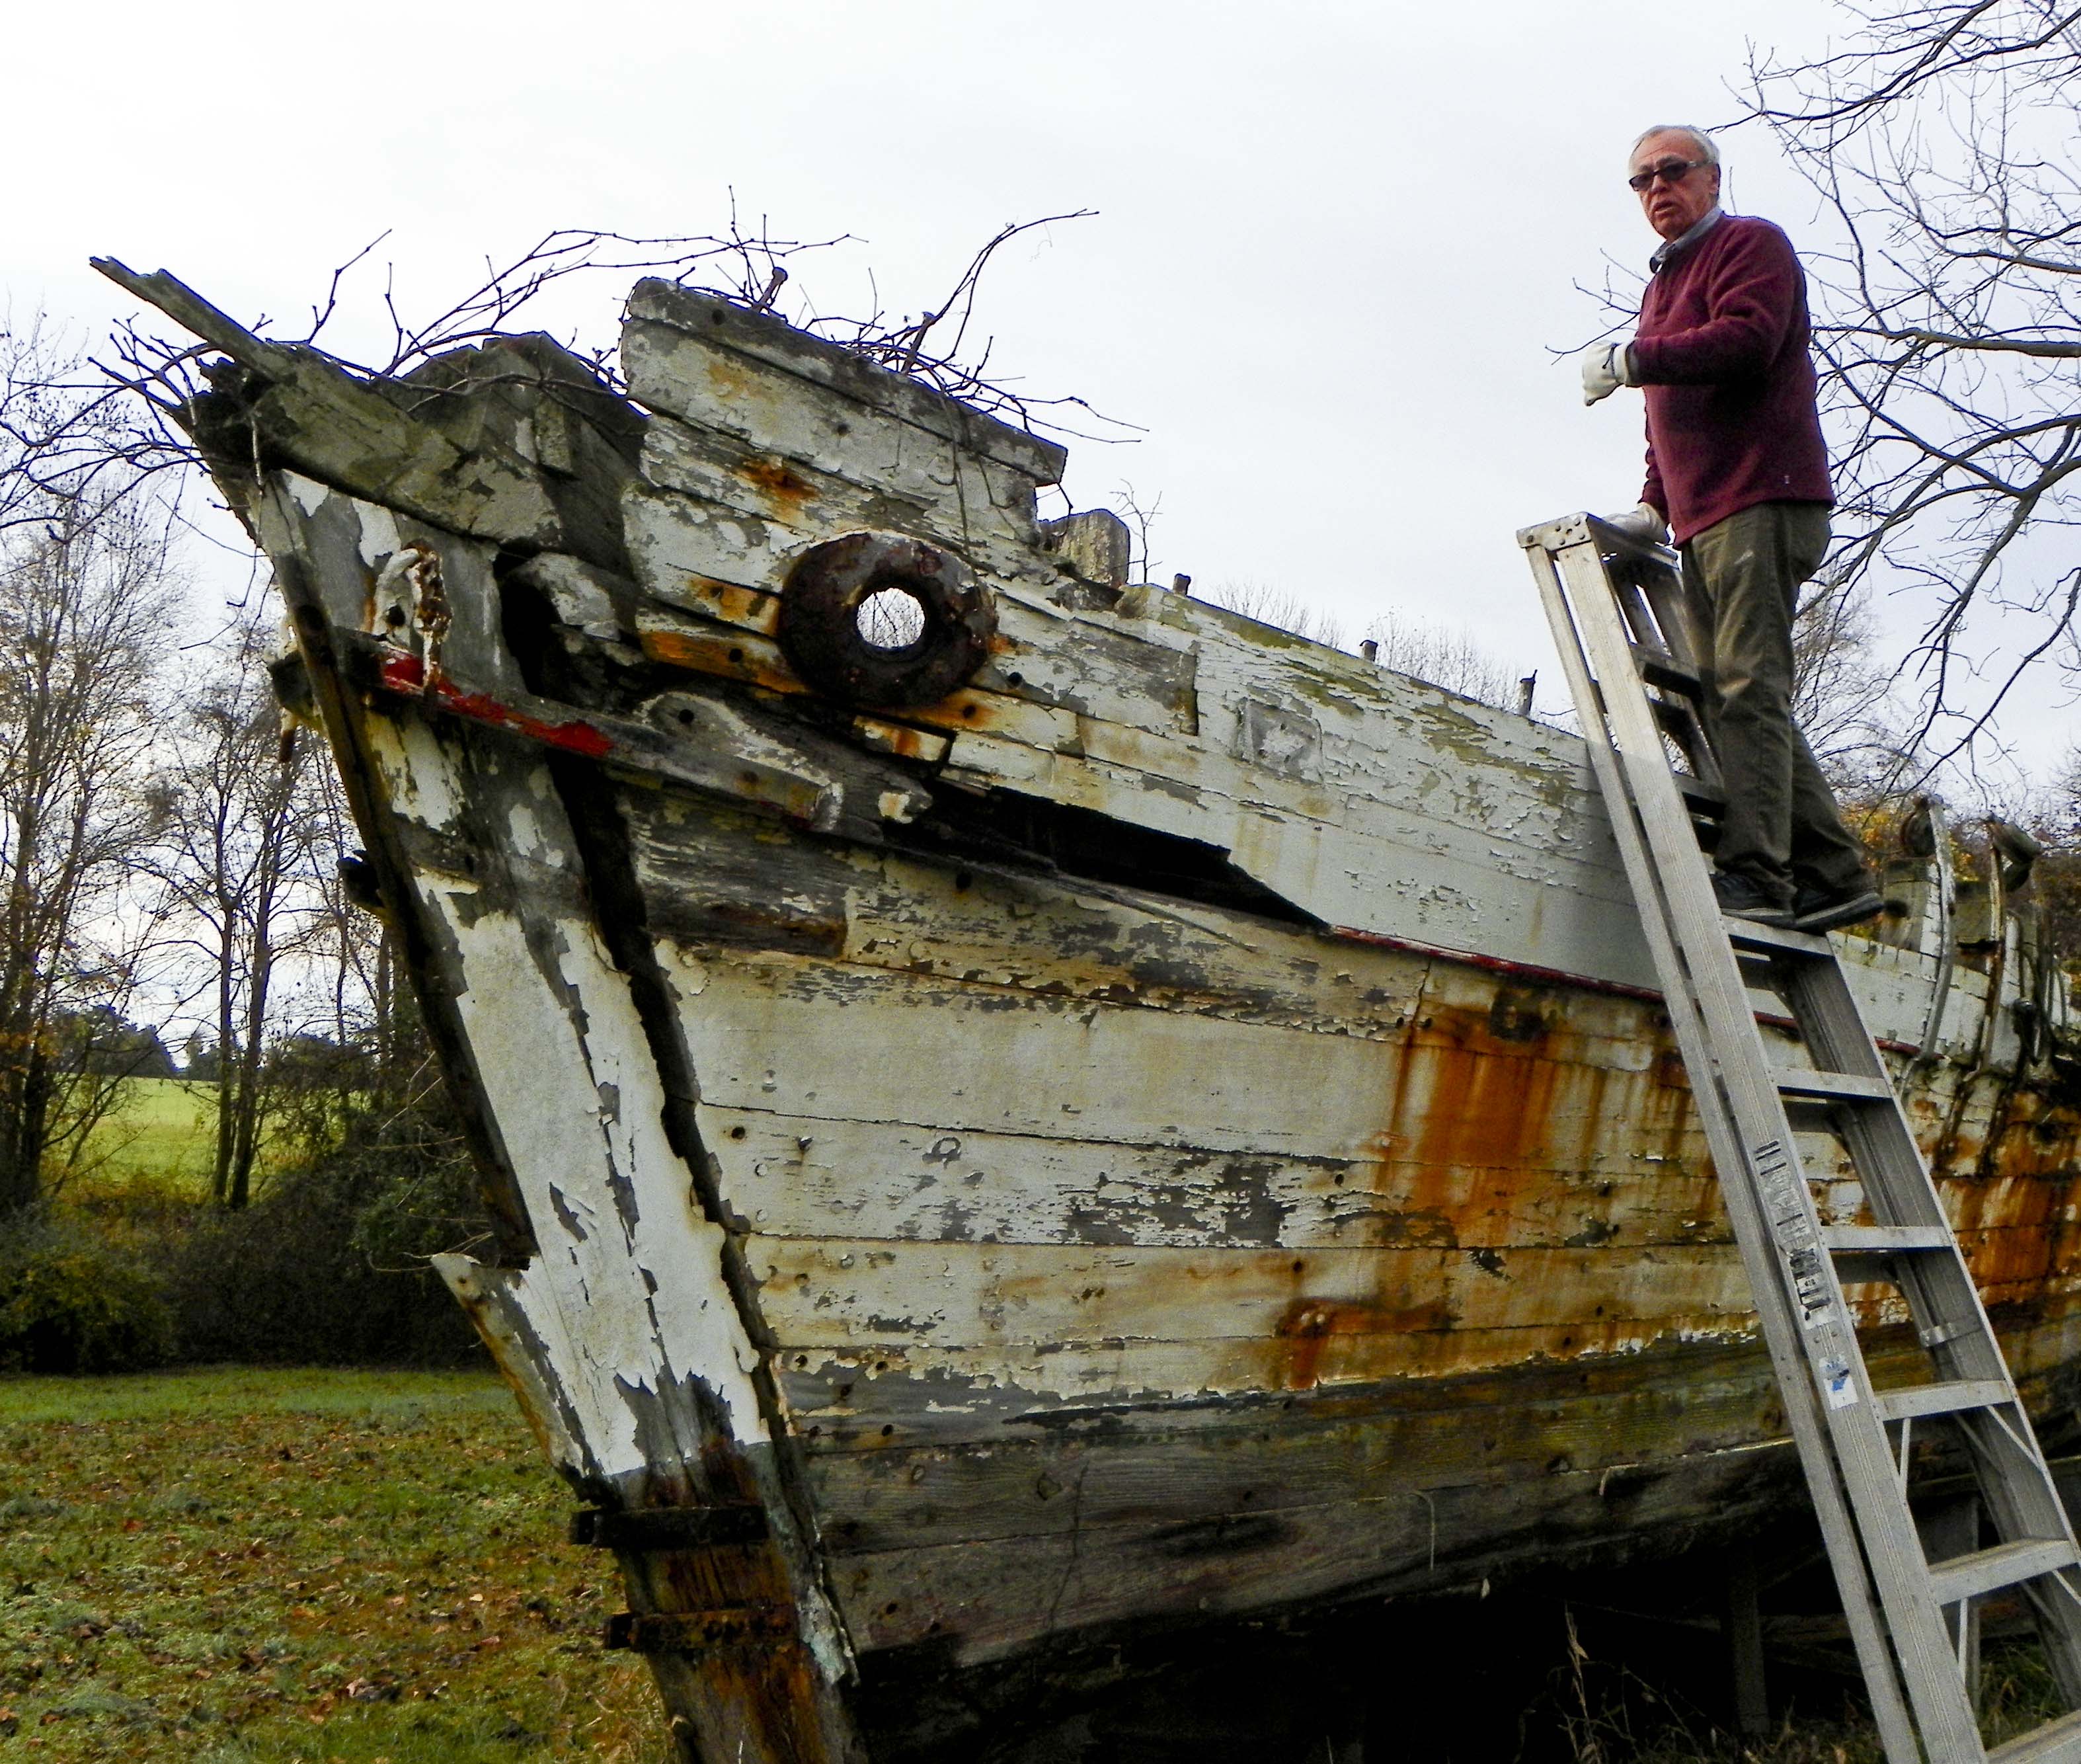 Capt. Stoney Whitelock is in the process of dismantling skipjack Mamie A. Mister